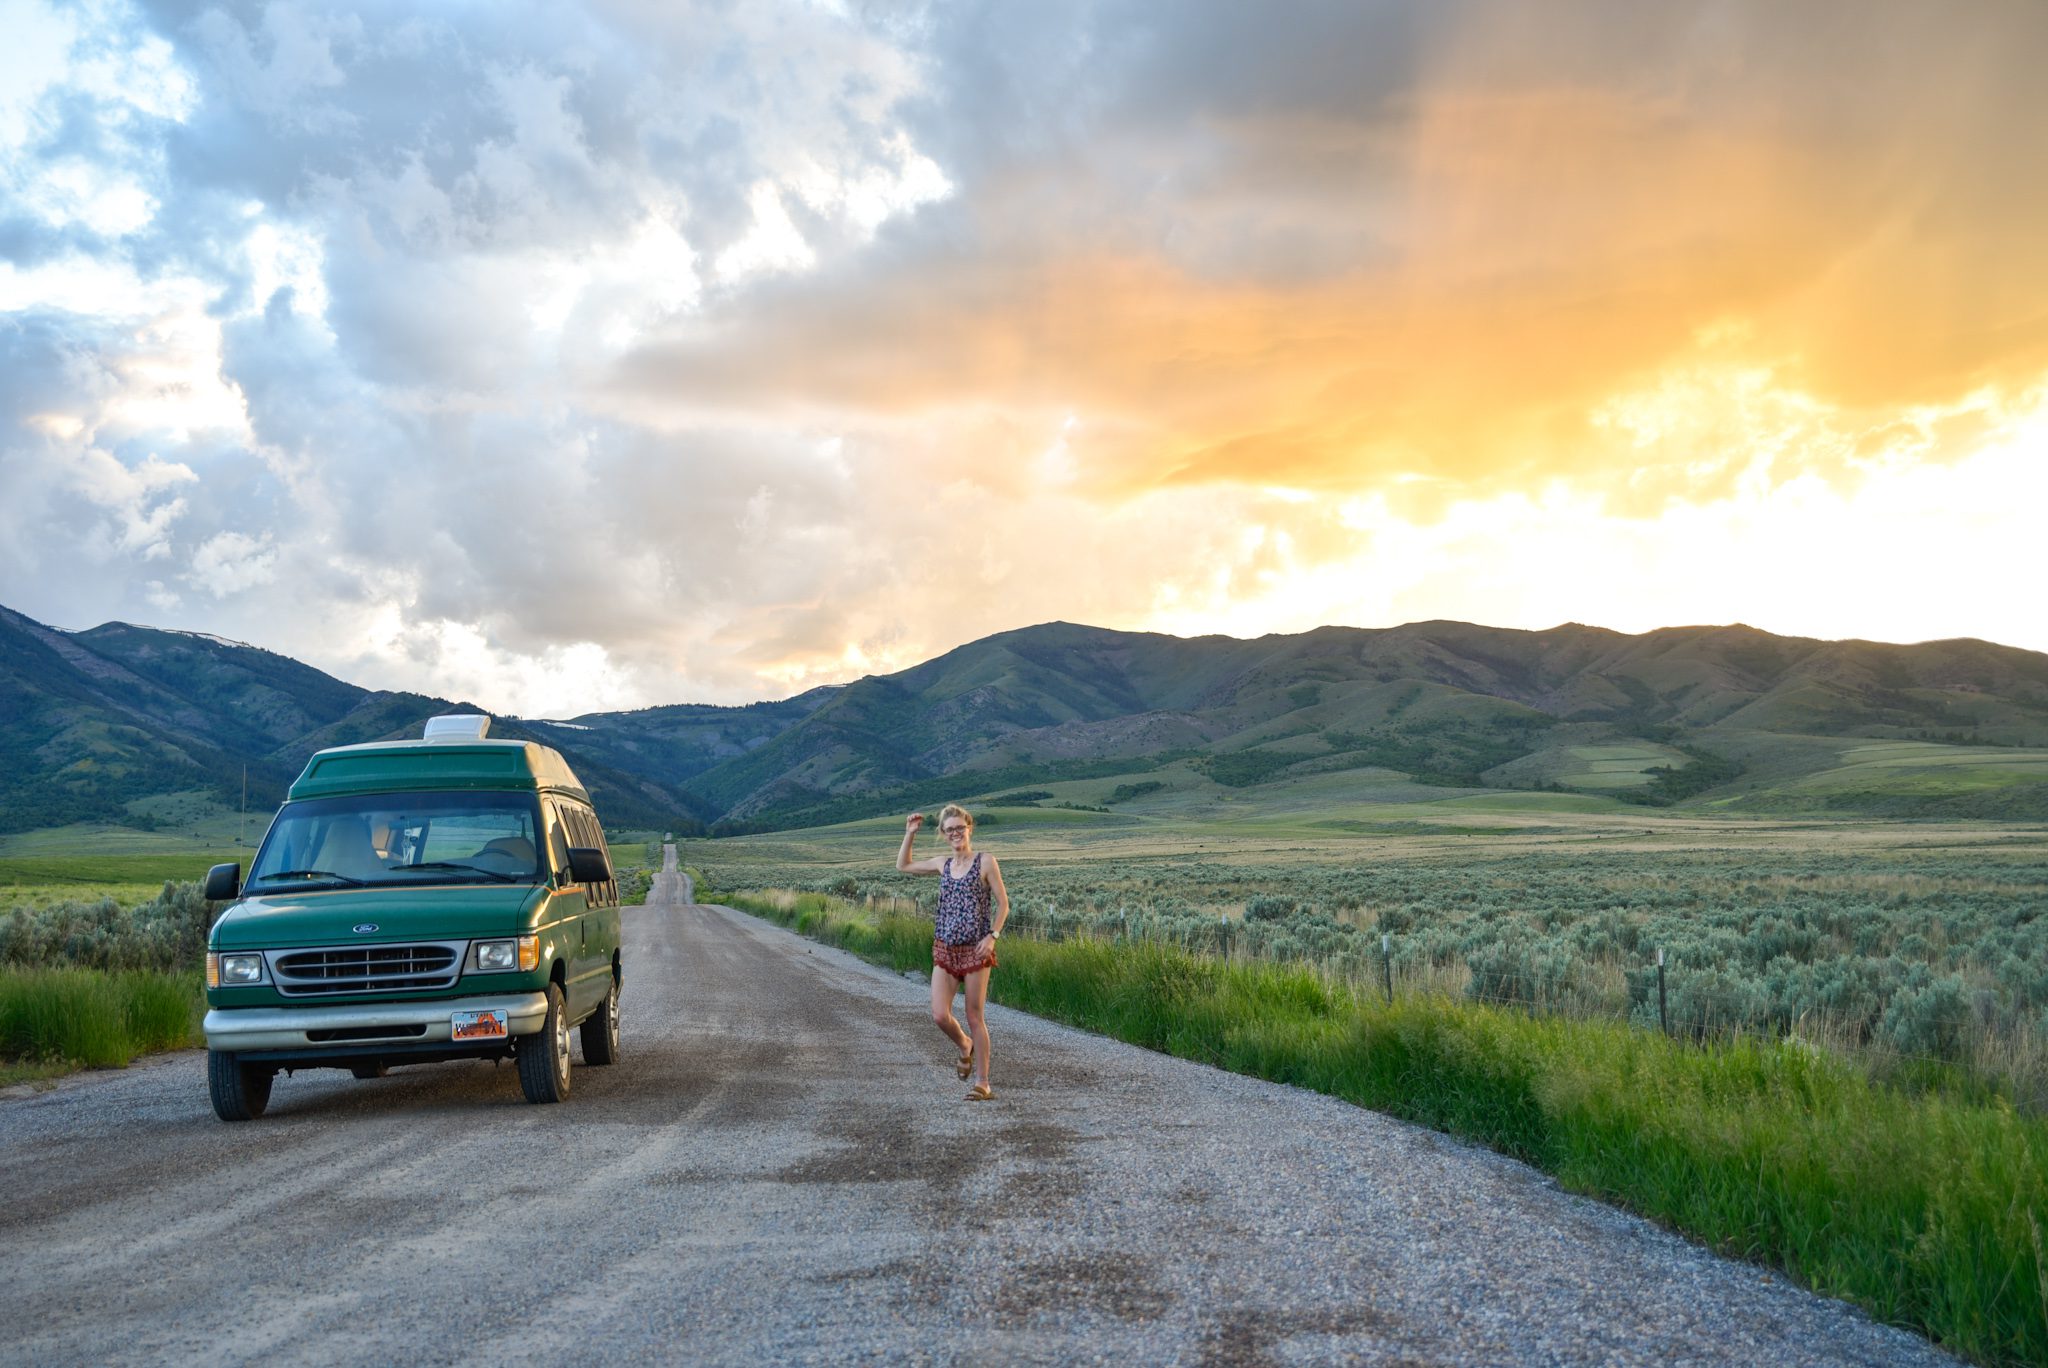 Is Solo Female Van Life for You? 3 Questions to Ask Yourself First